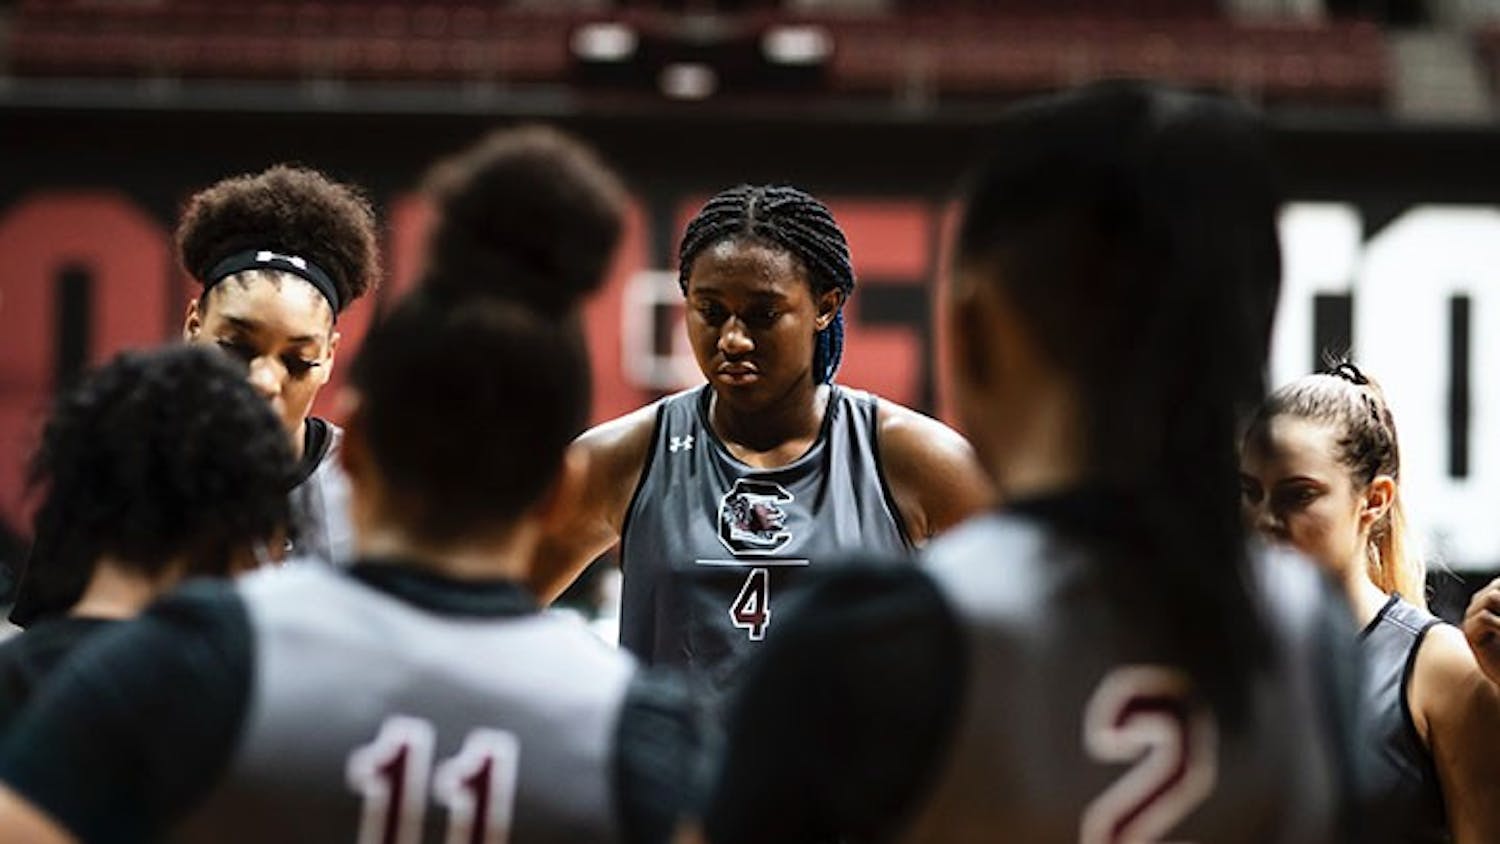 Sophomore forward Aliyah Boston stands in a huddle with her fellow teammates during the first official practice of the season.